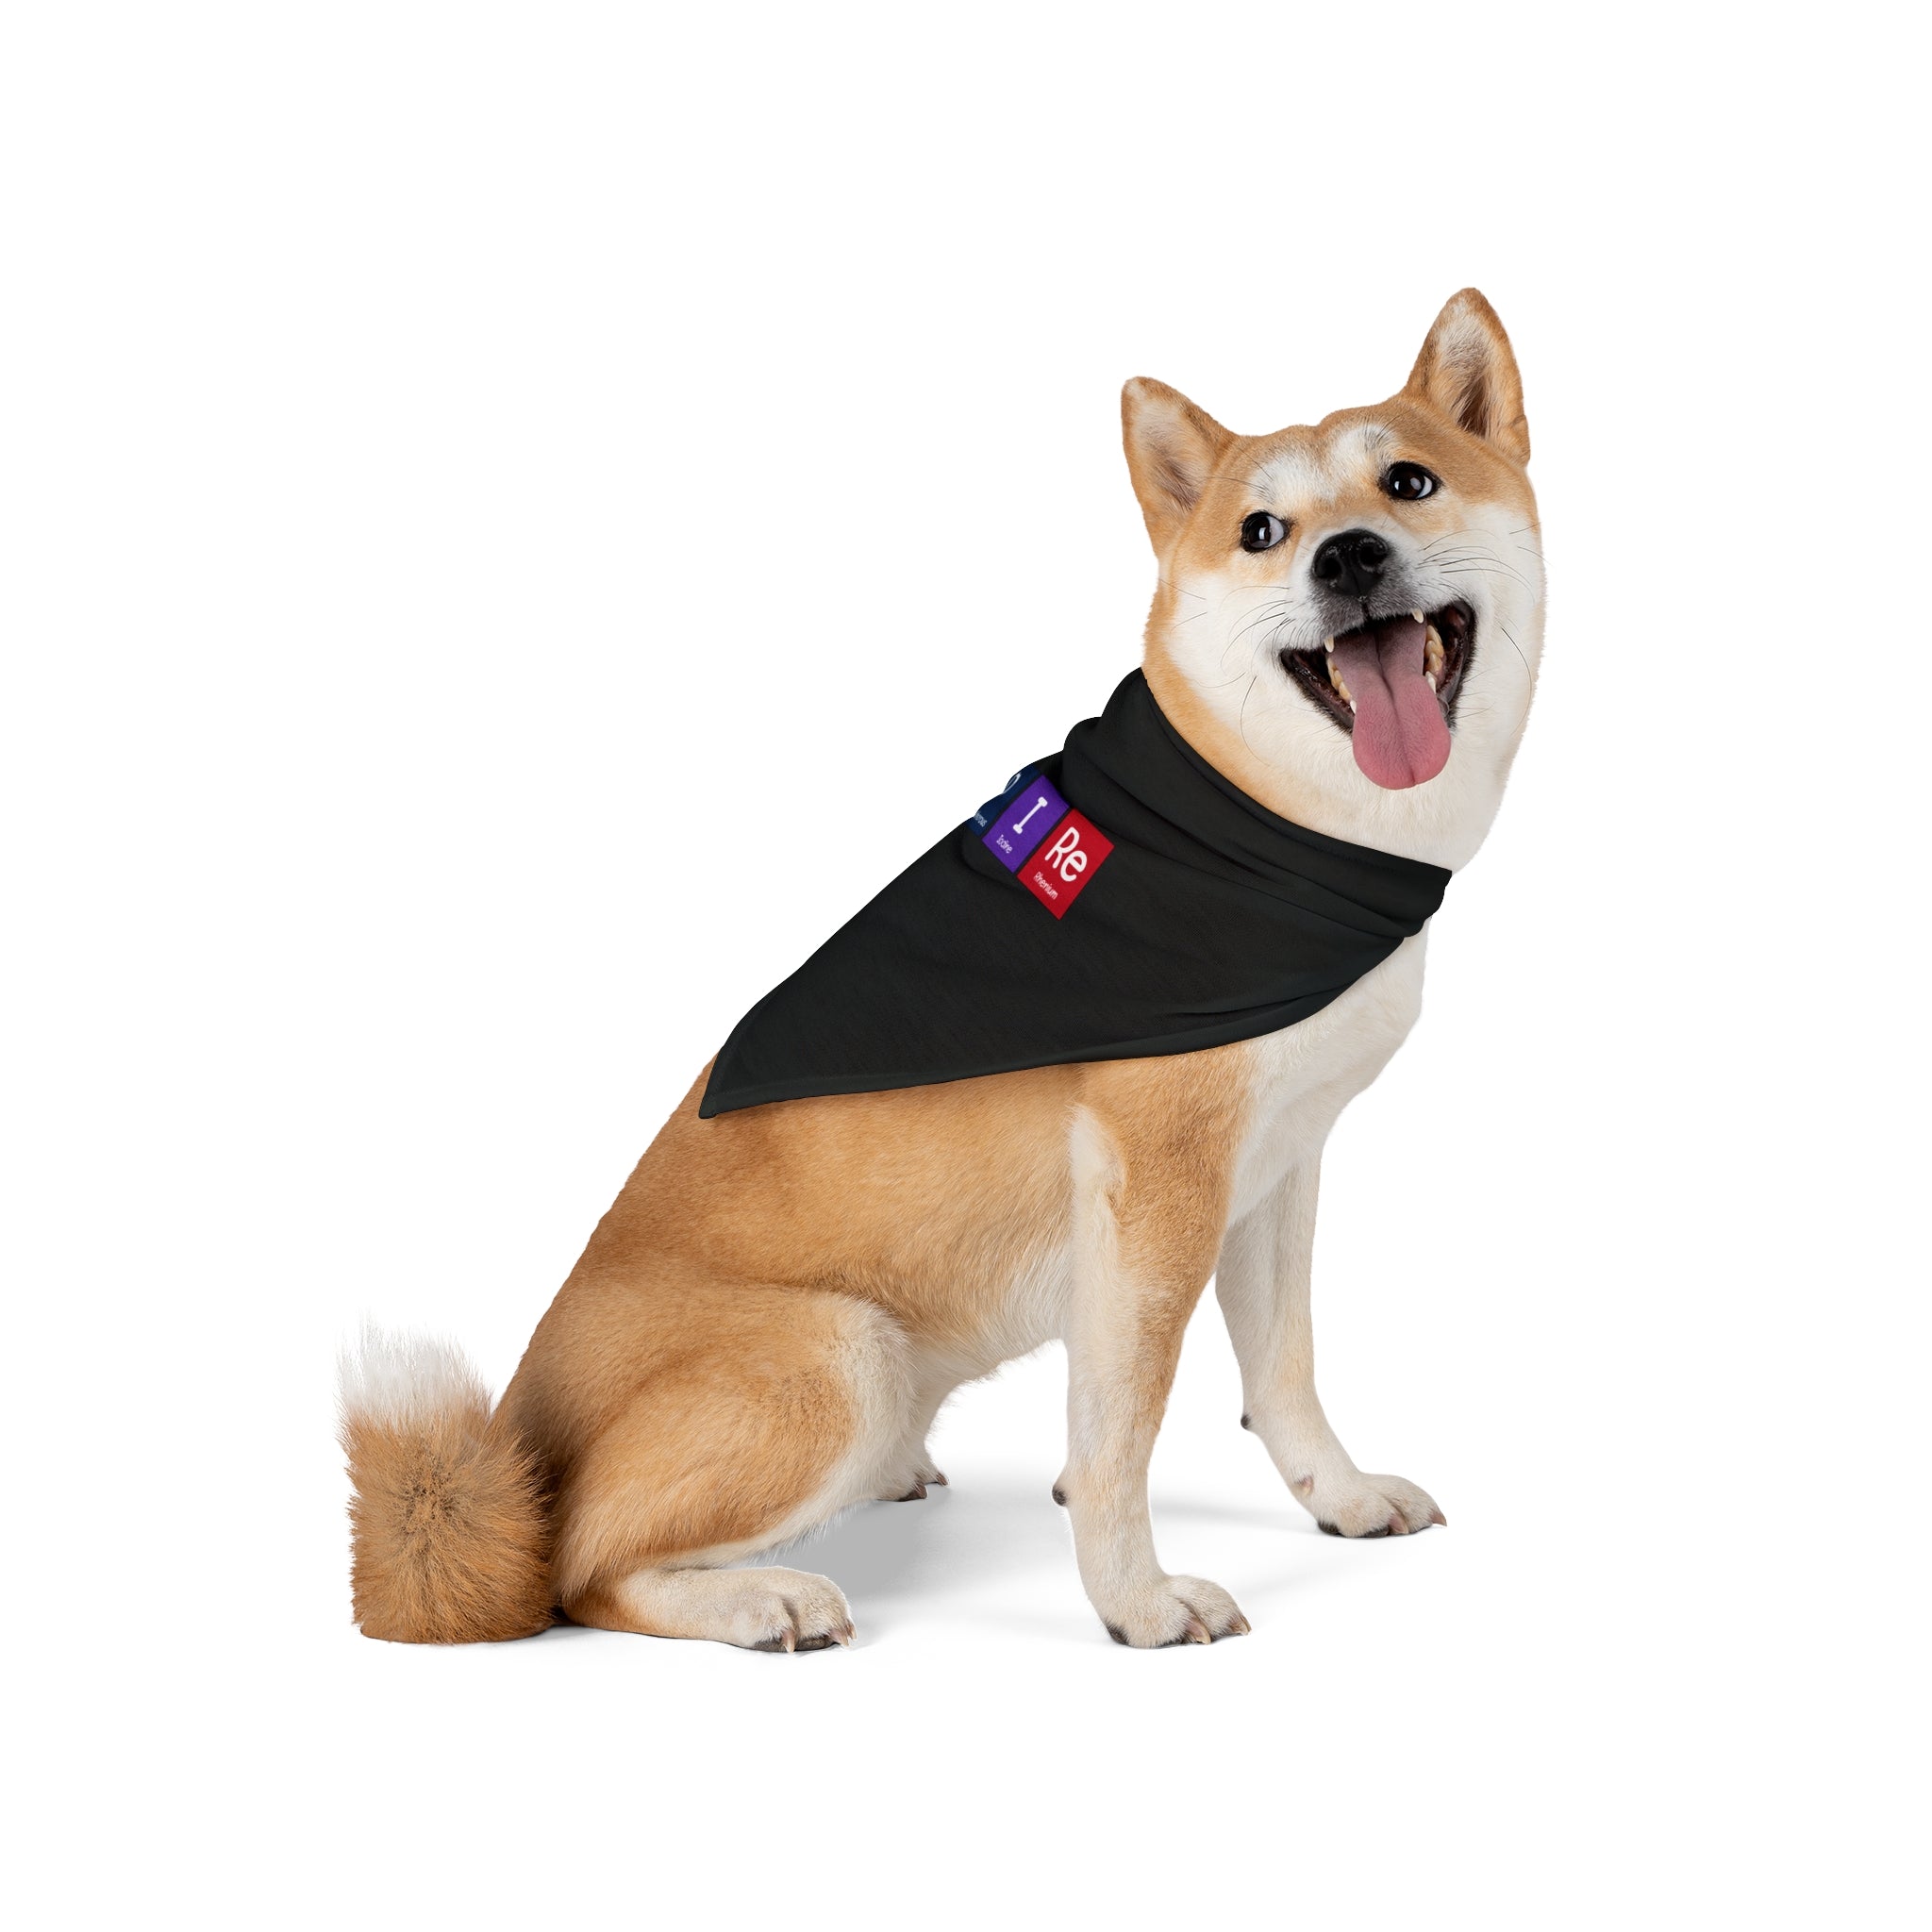 A Shiba Inu dog, embodying the epitome of pet's style, sits with its tongue out against a white background, proudly sporting an In-S-P-I-Re - Pet Bandana made from soft-spun polyester.